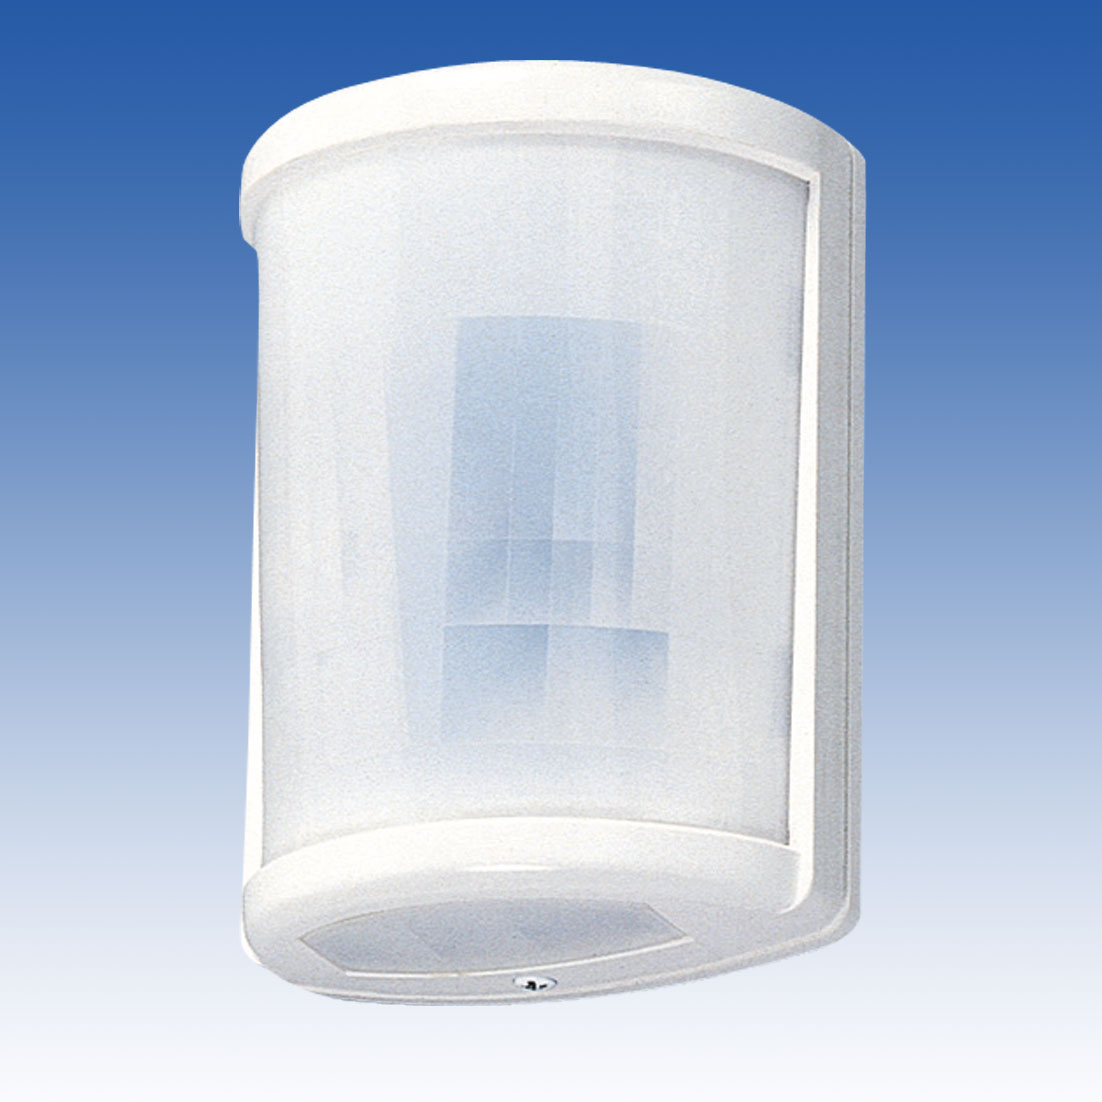 TAKEX HARDWIRED 180° PIR WHITE 180°x 8M DETECTION AREA 1 x N/C OUTPUT (DRY) PLASTIC WALL MOUNT 9-18VDC